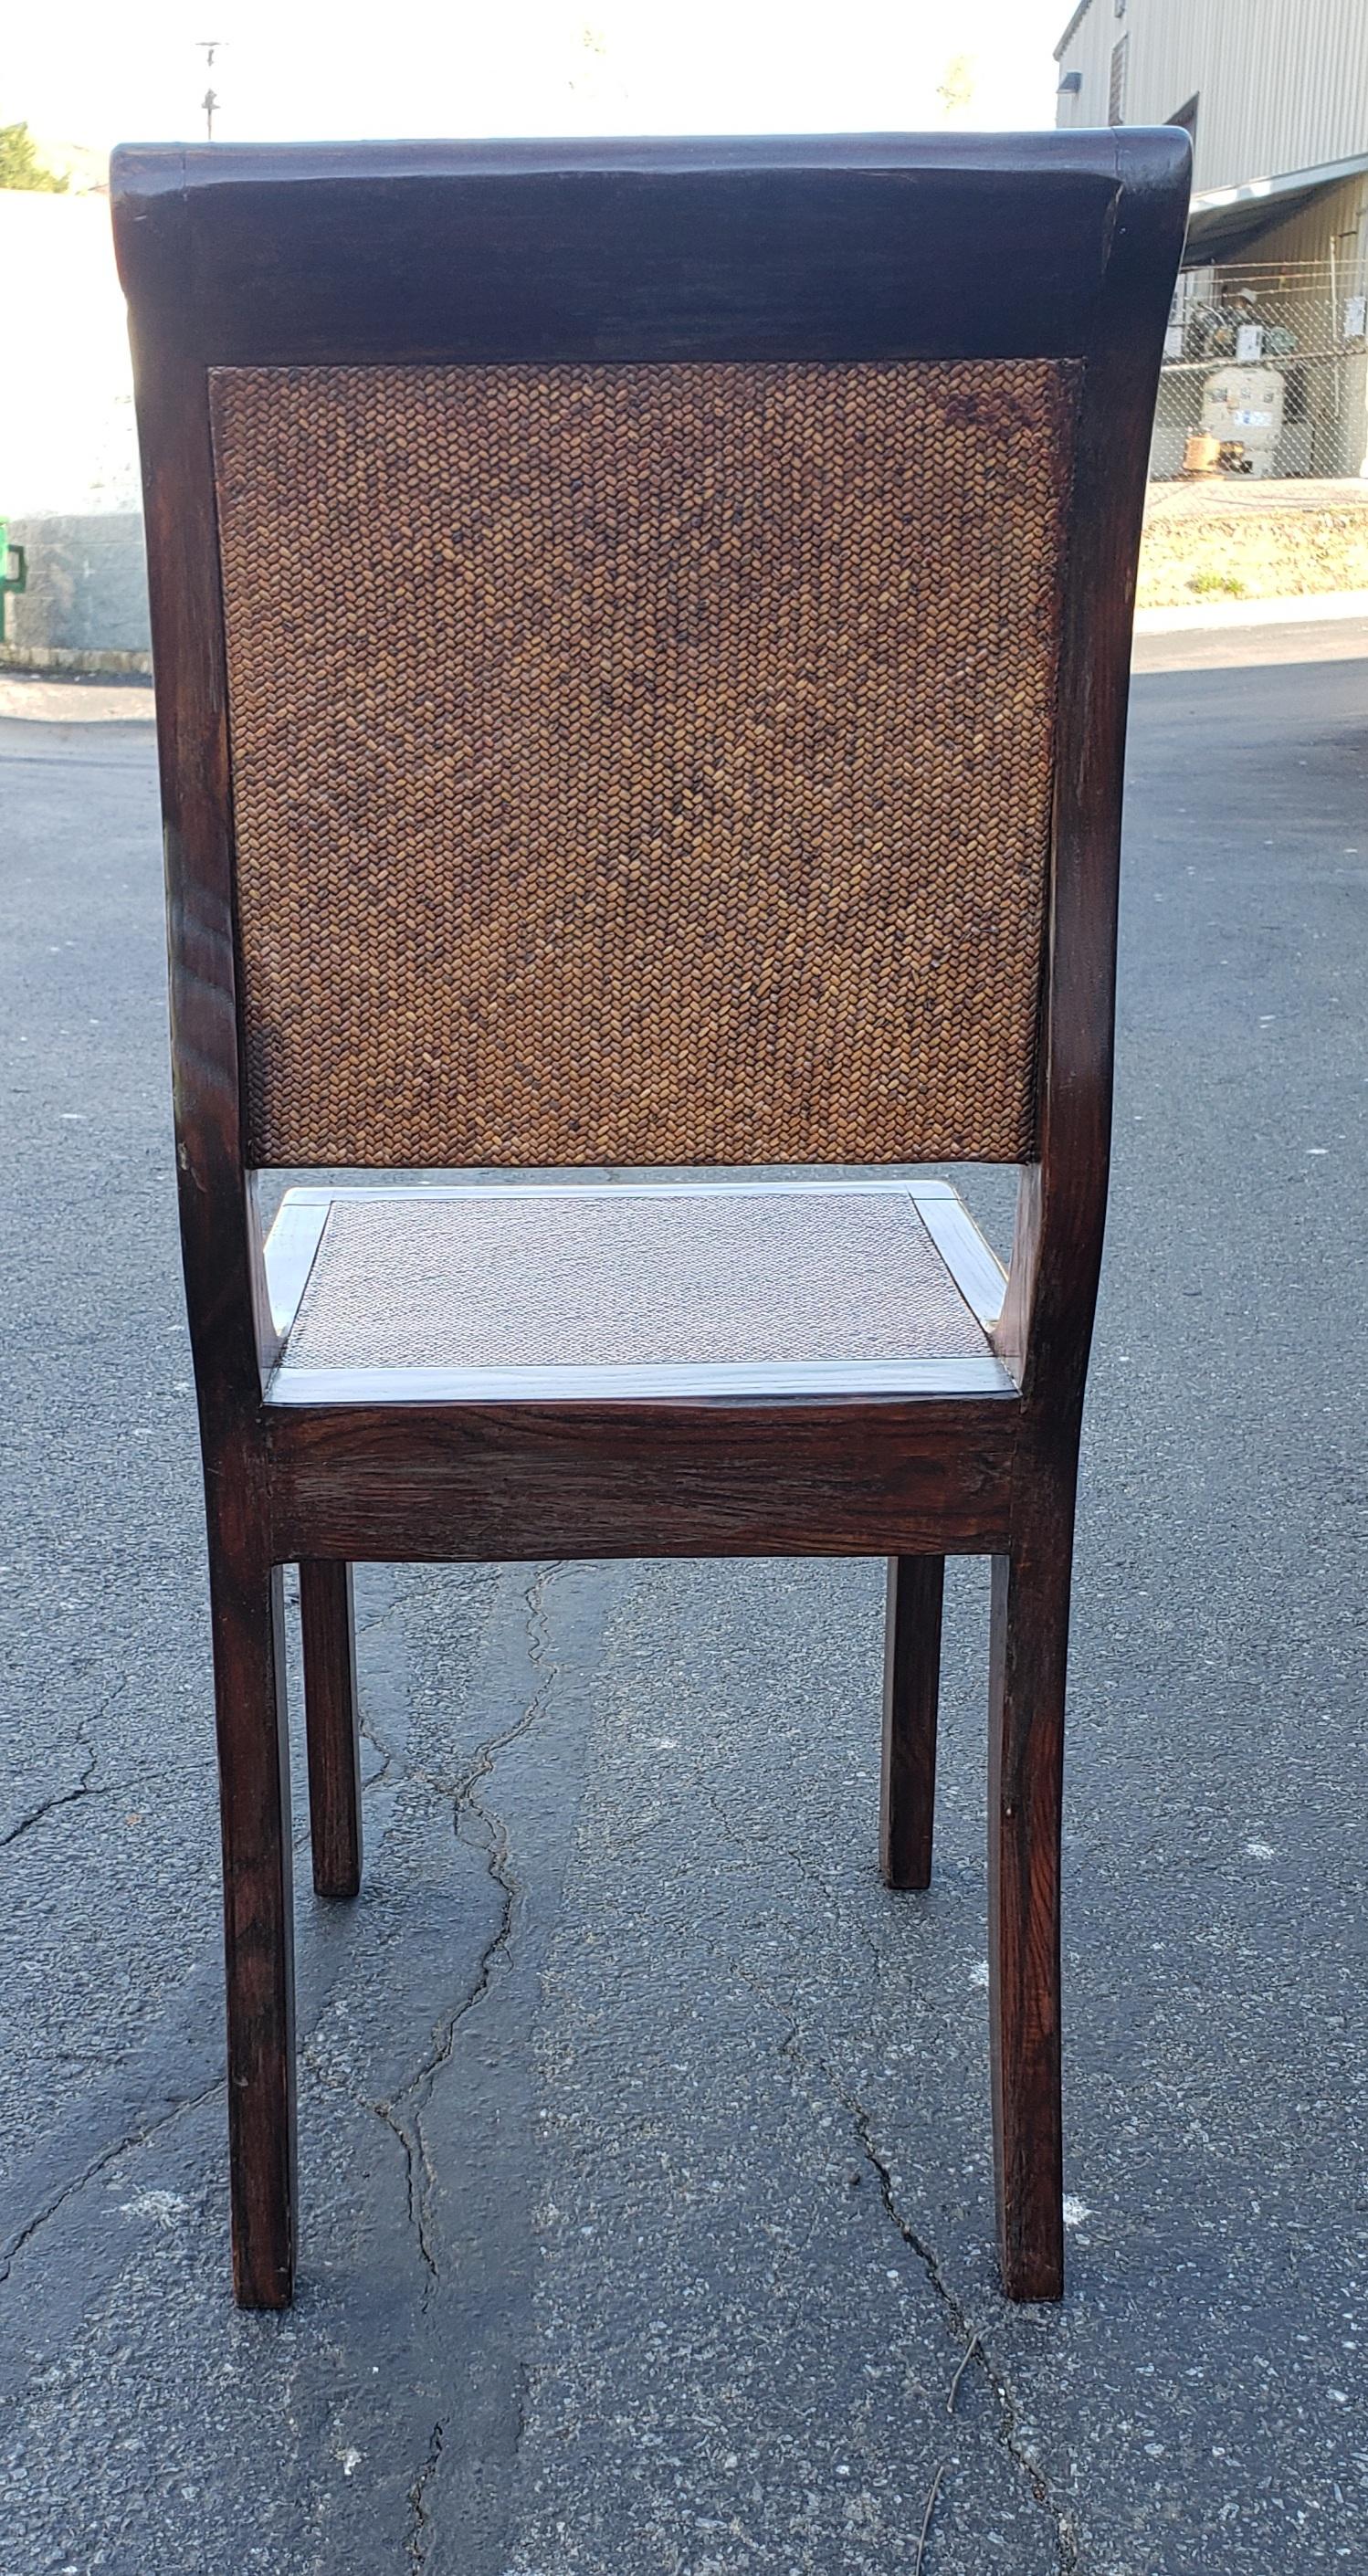 Pair of 1950s Rosewood and Braided Wicker over Hardwood Seat and Back Chairs For Sale 1